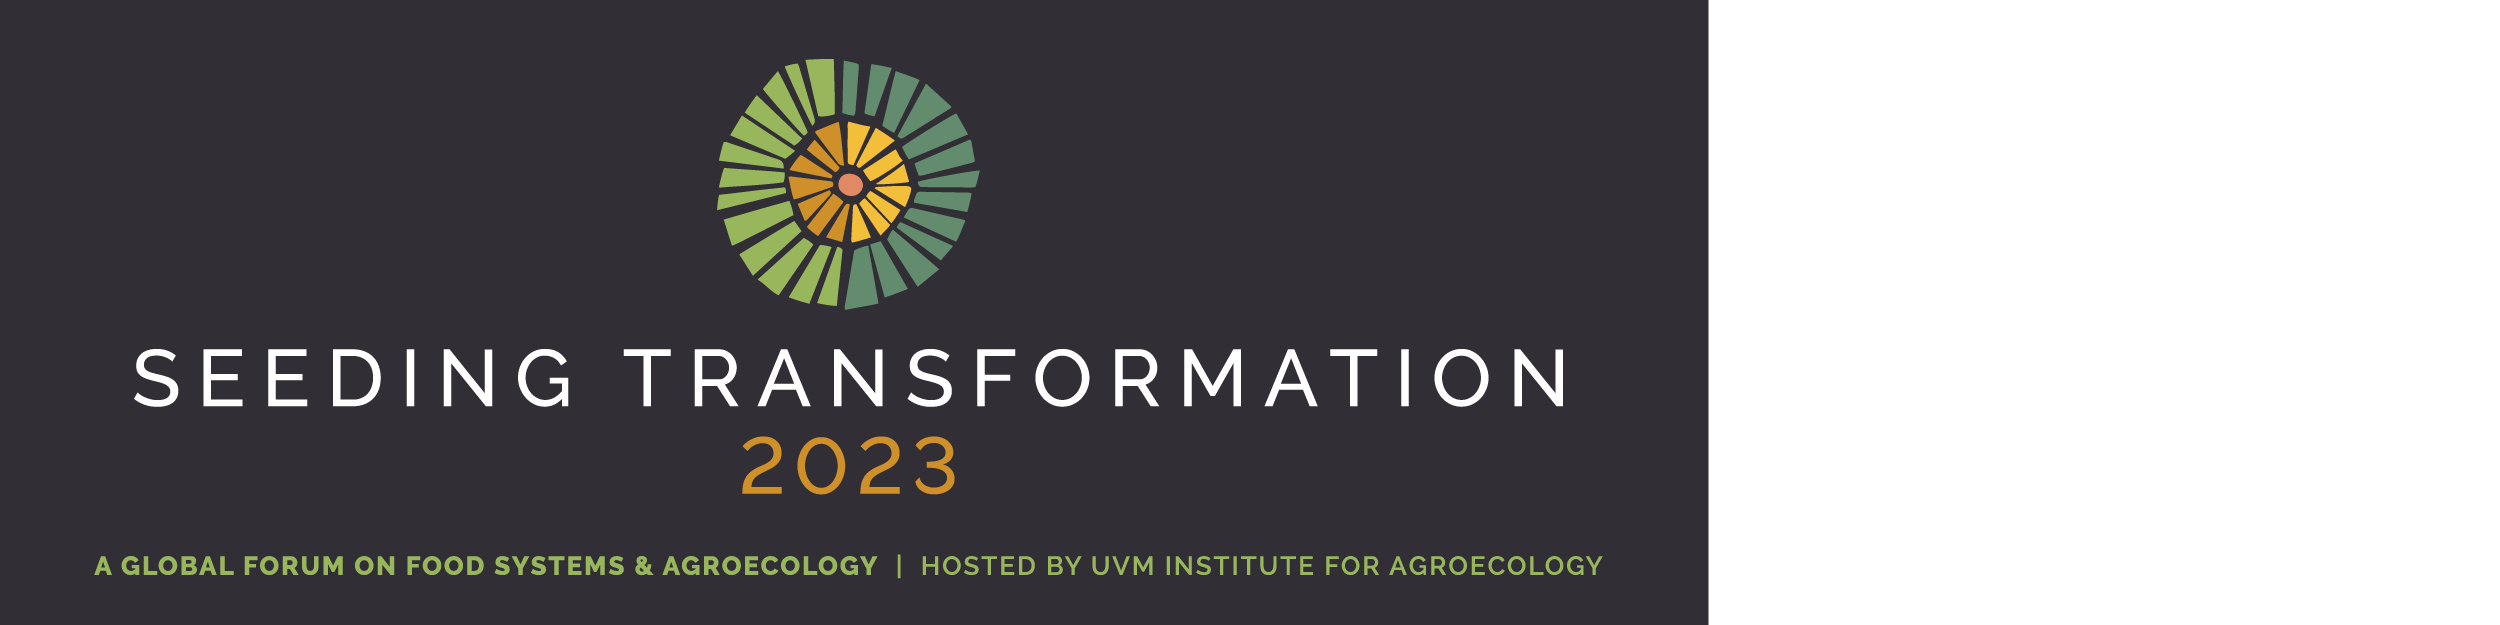 Banner for the Seeding Transformations conference